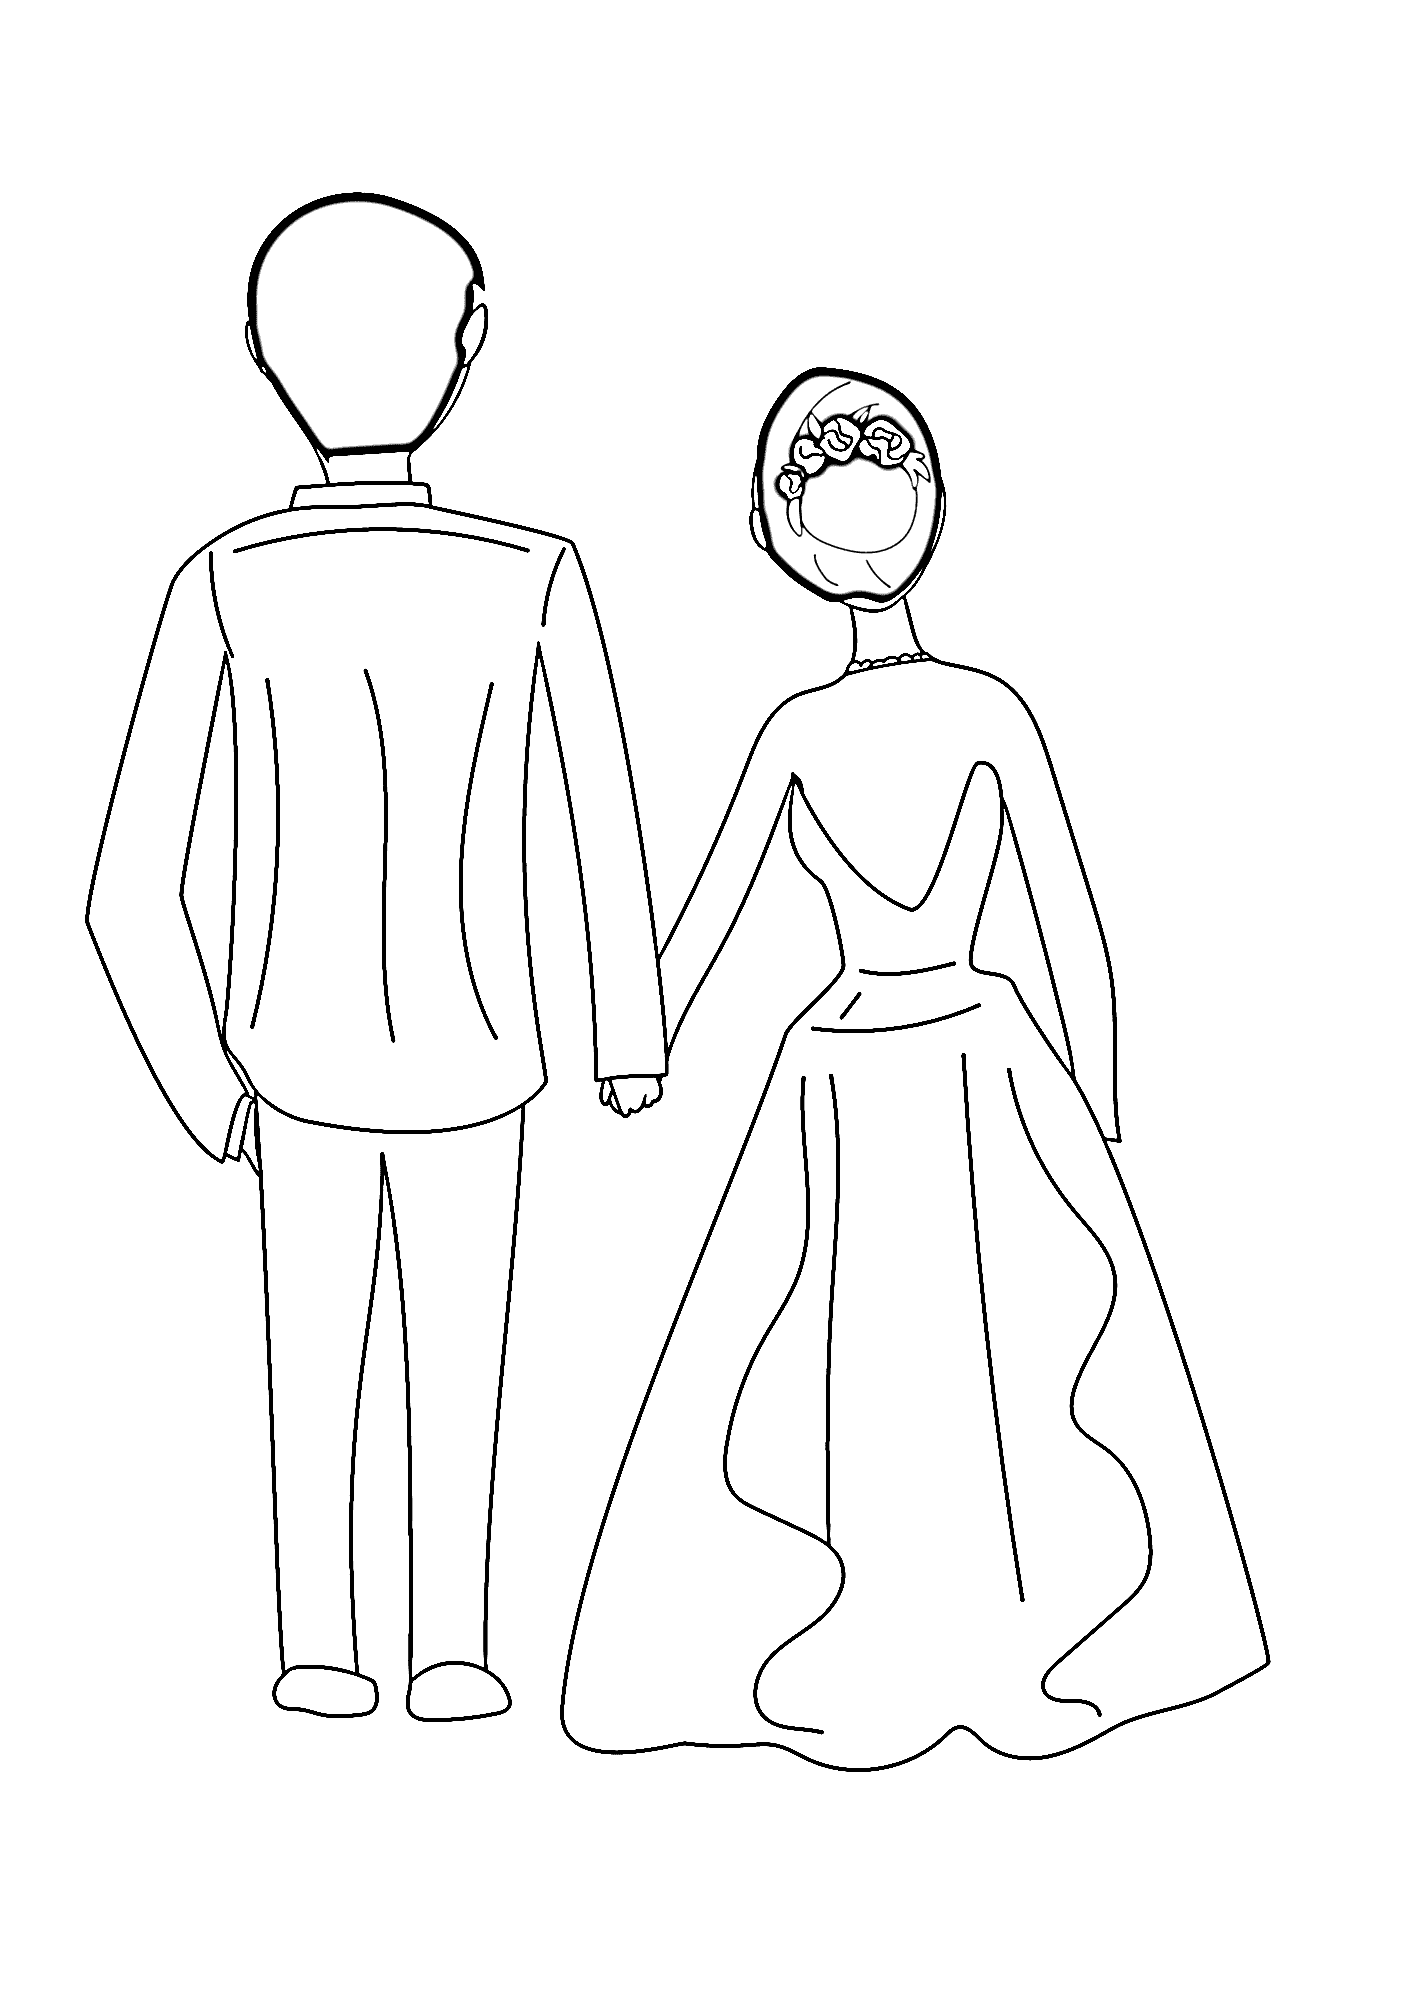 Bride And Groom Coloring Page